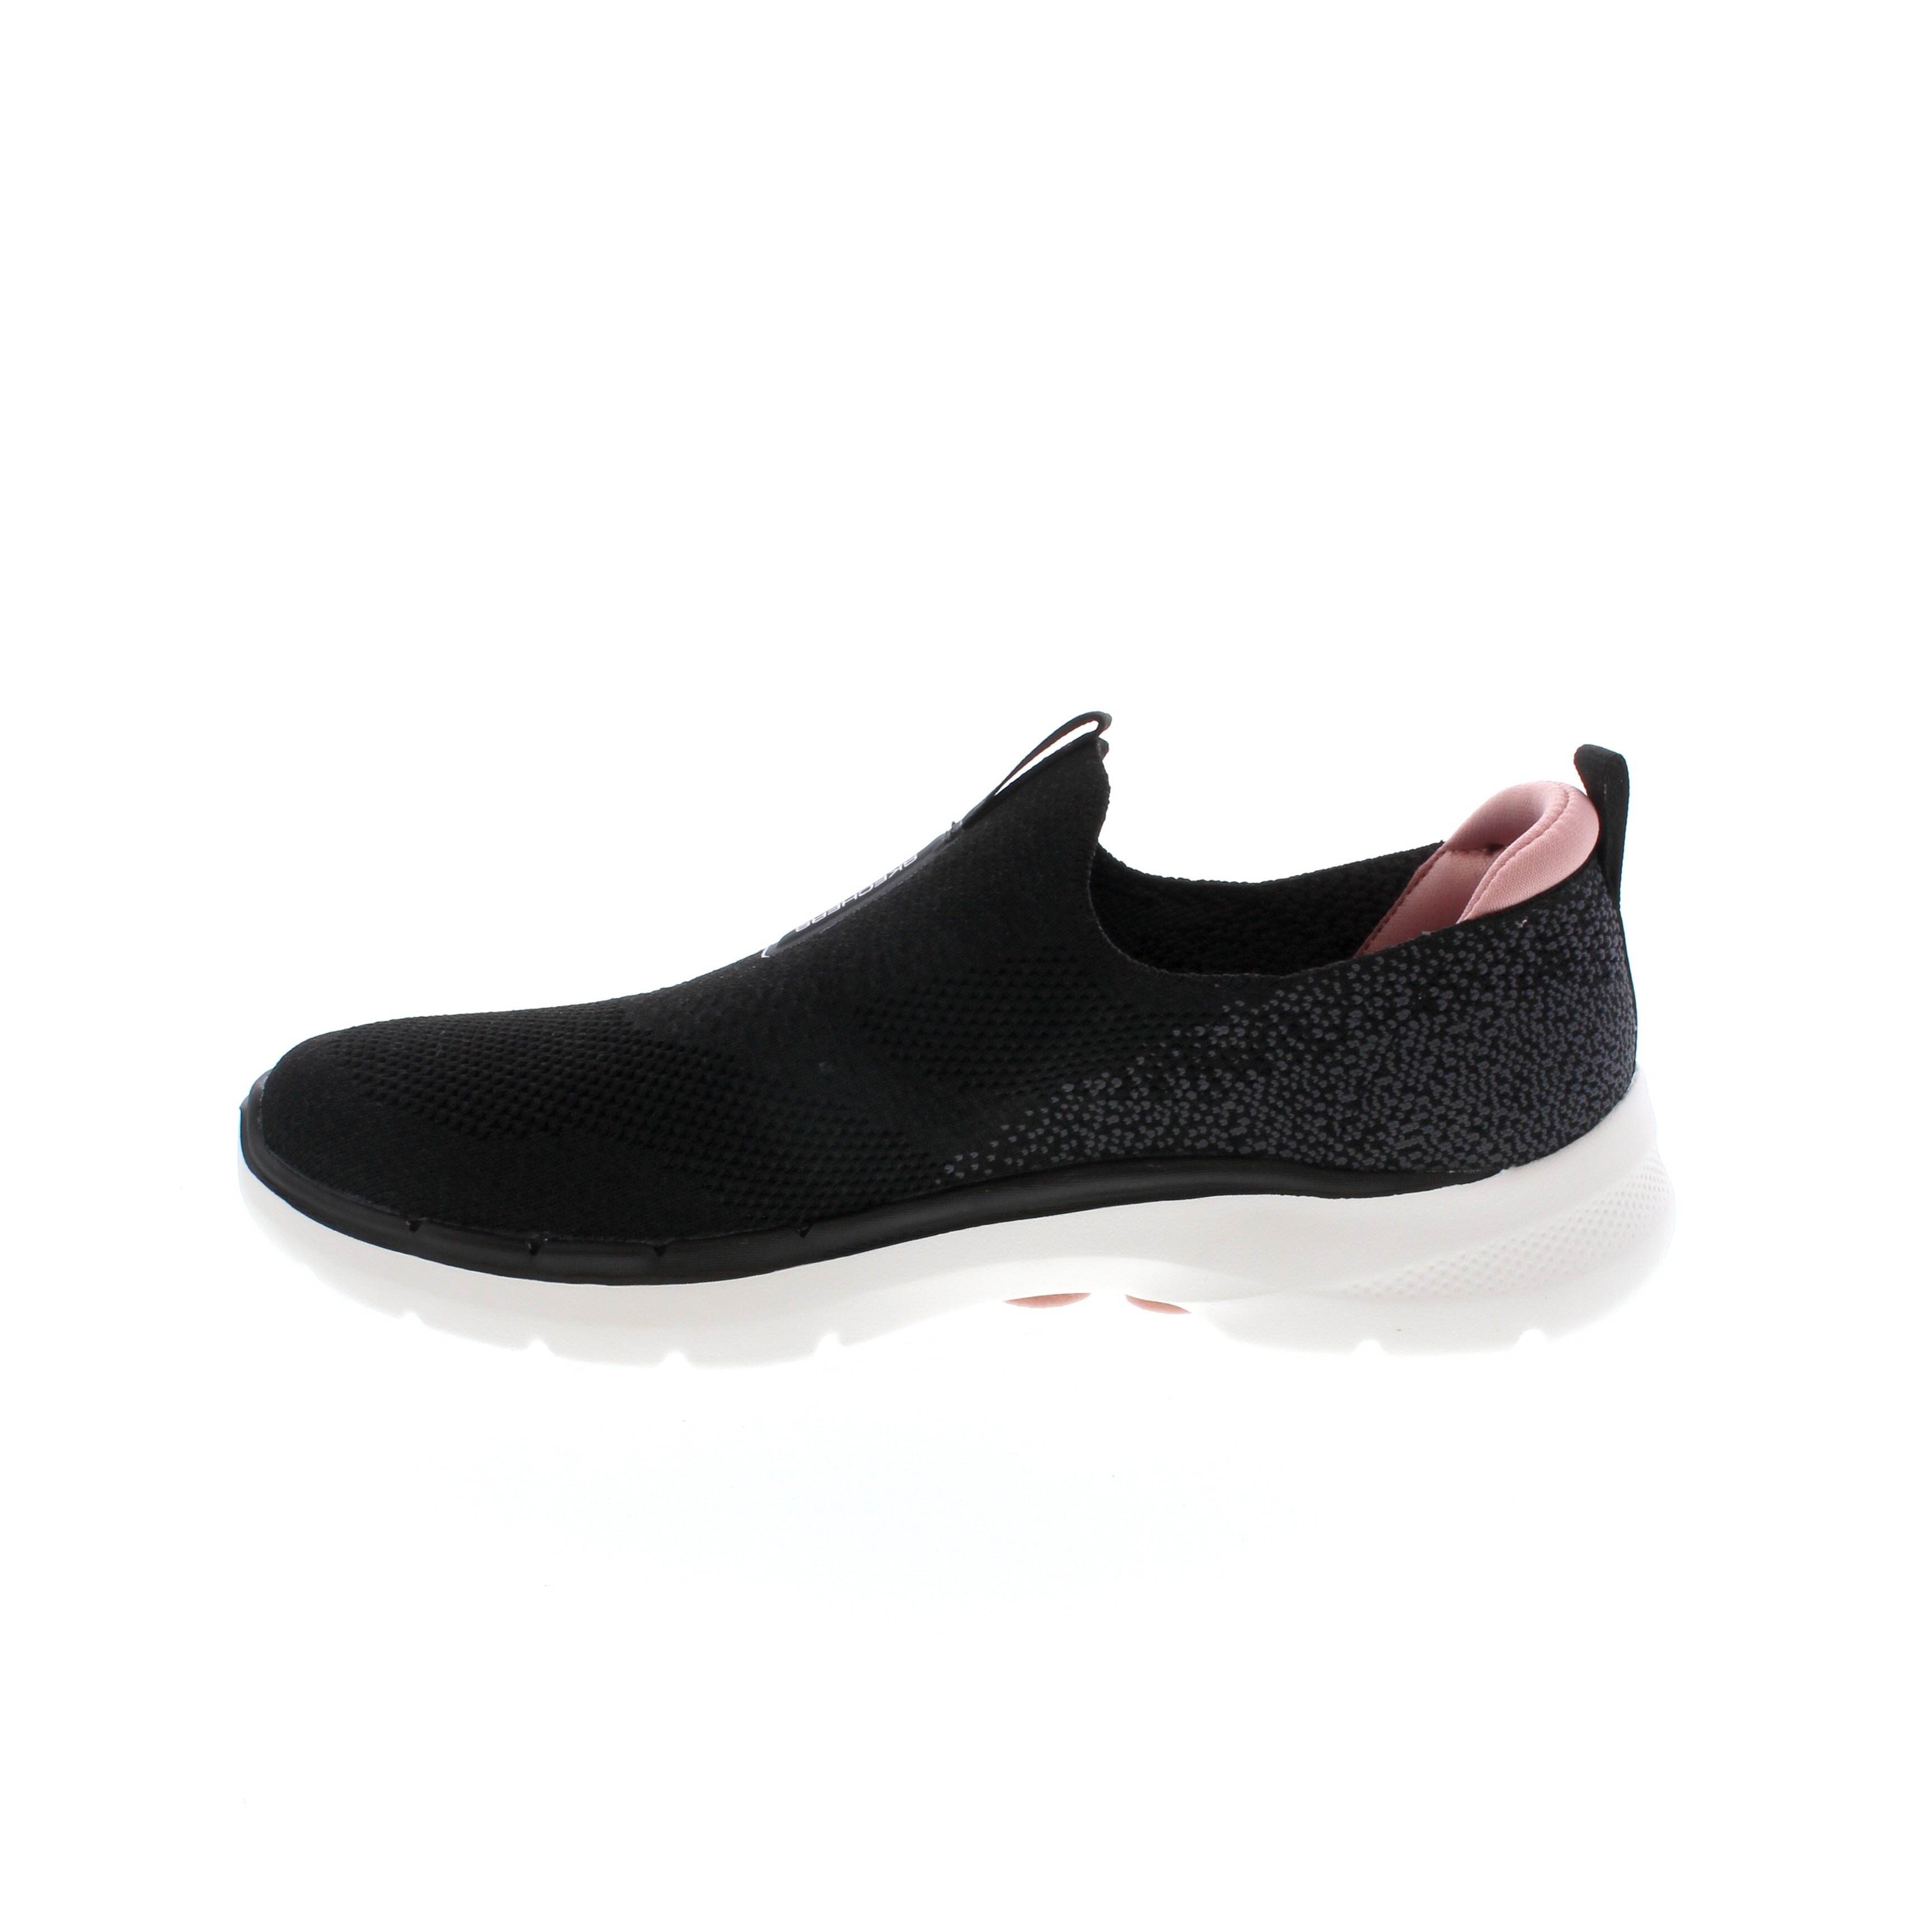 Skechers Glimmering | Sole City Black/Pink – Shoes